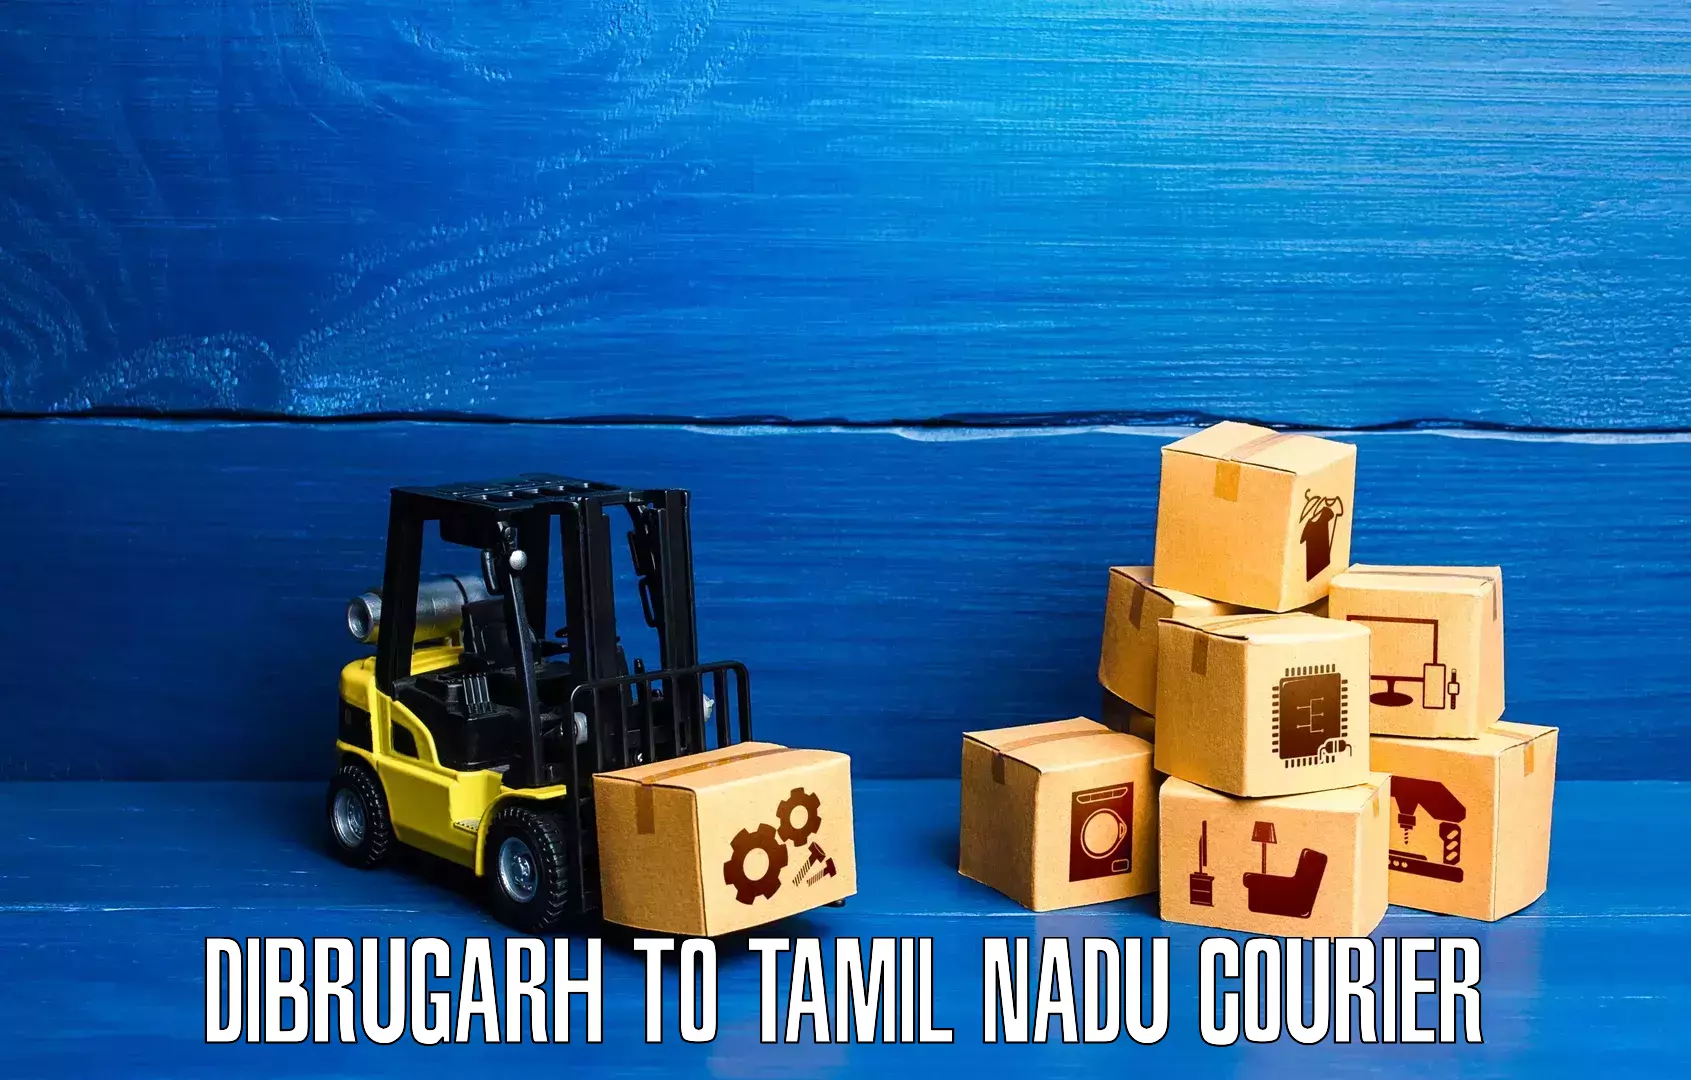 Express delivery capabilities Dibrugarh to Tamil Nadu